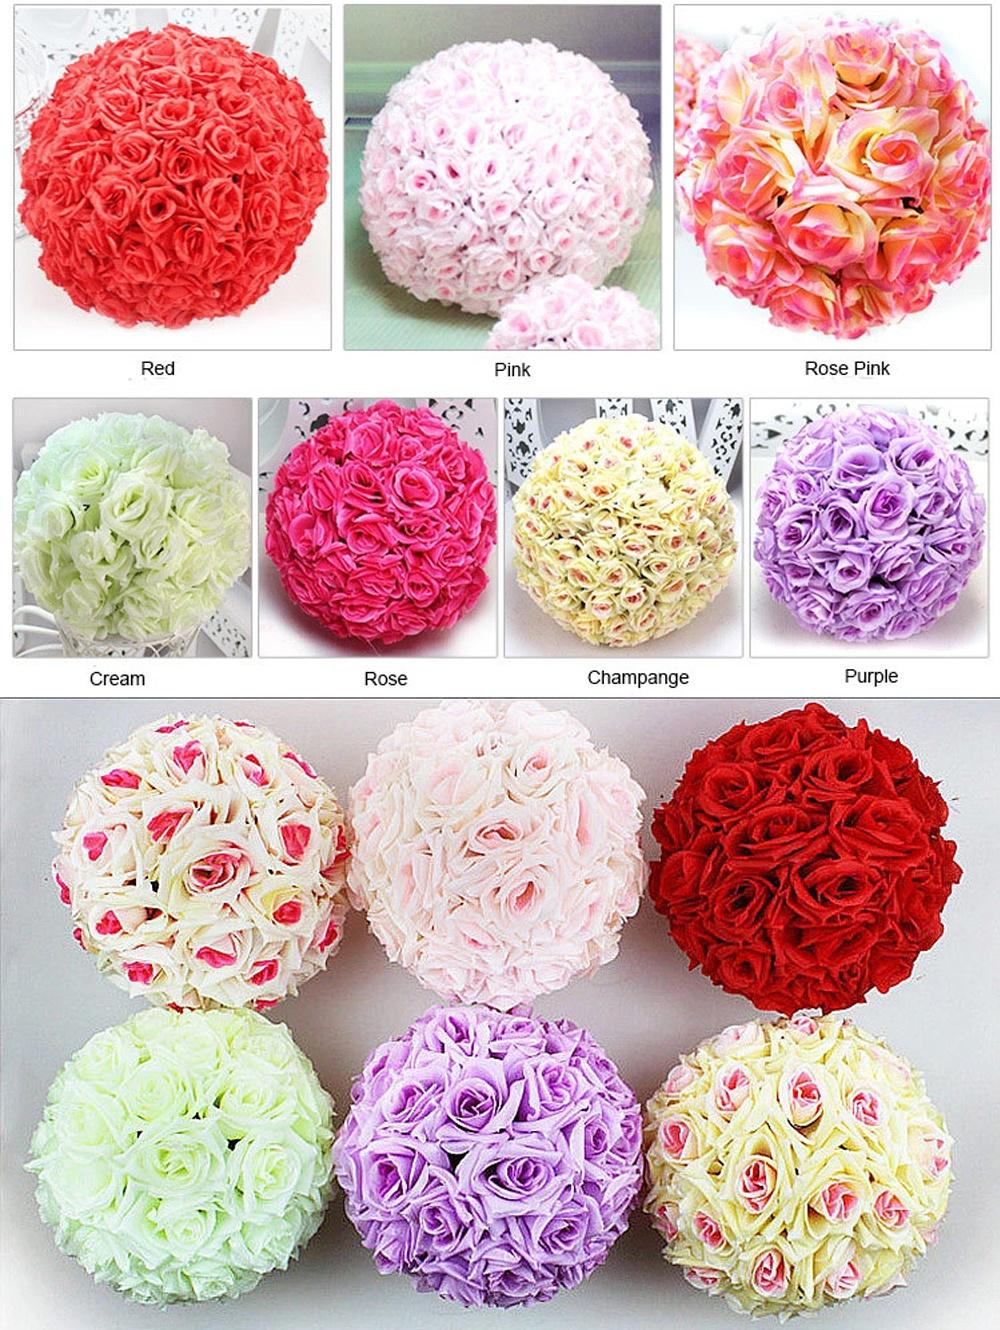 Fashionable Hanging Decorative Artificial Rose Silk Flower Ball Centerpieces for Wedding